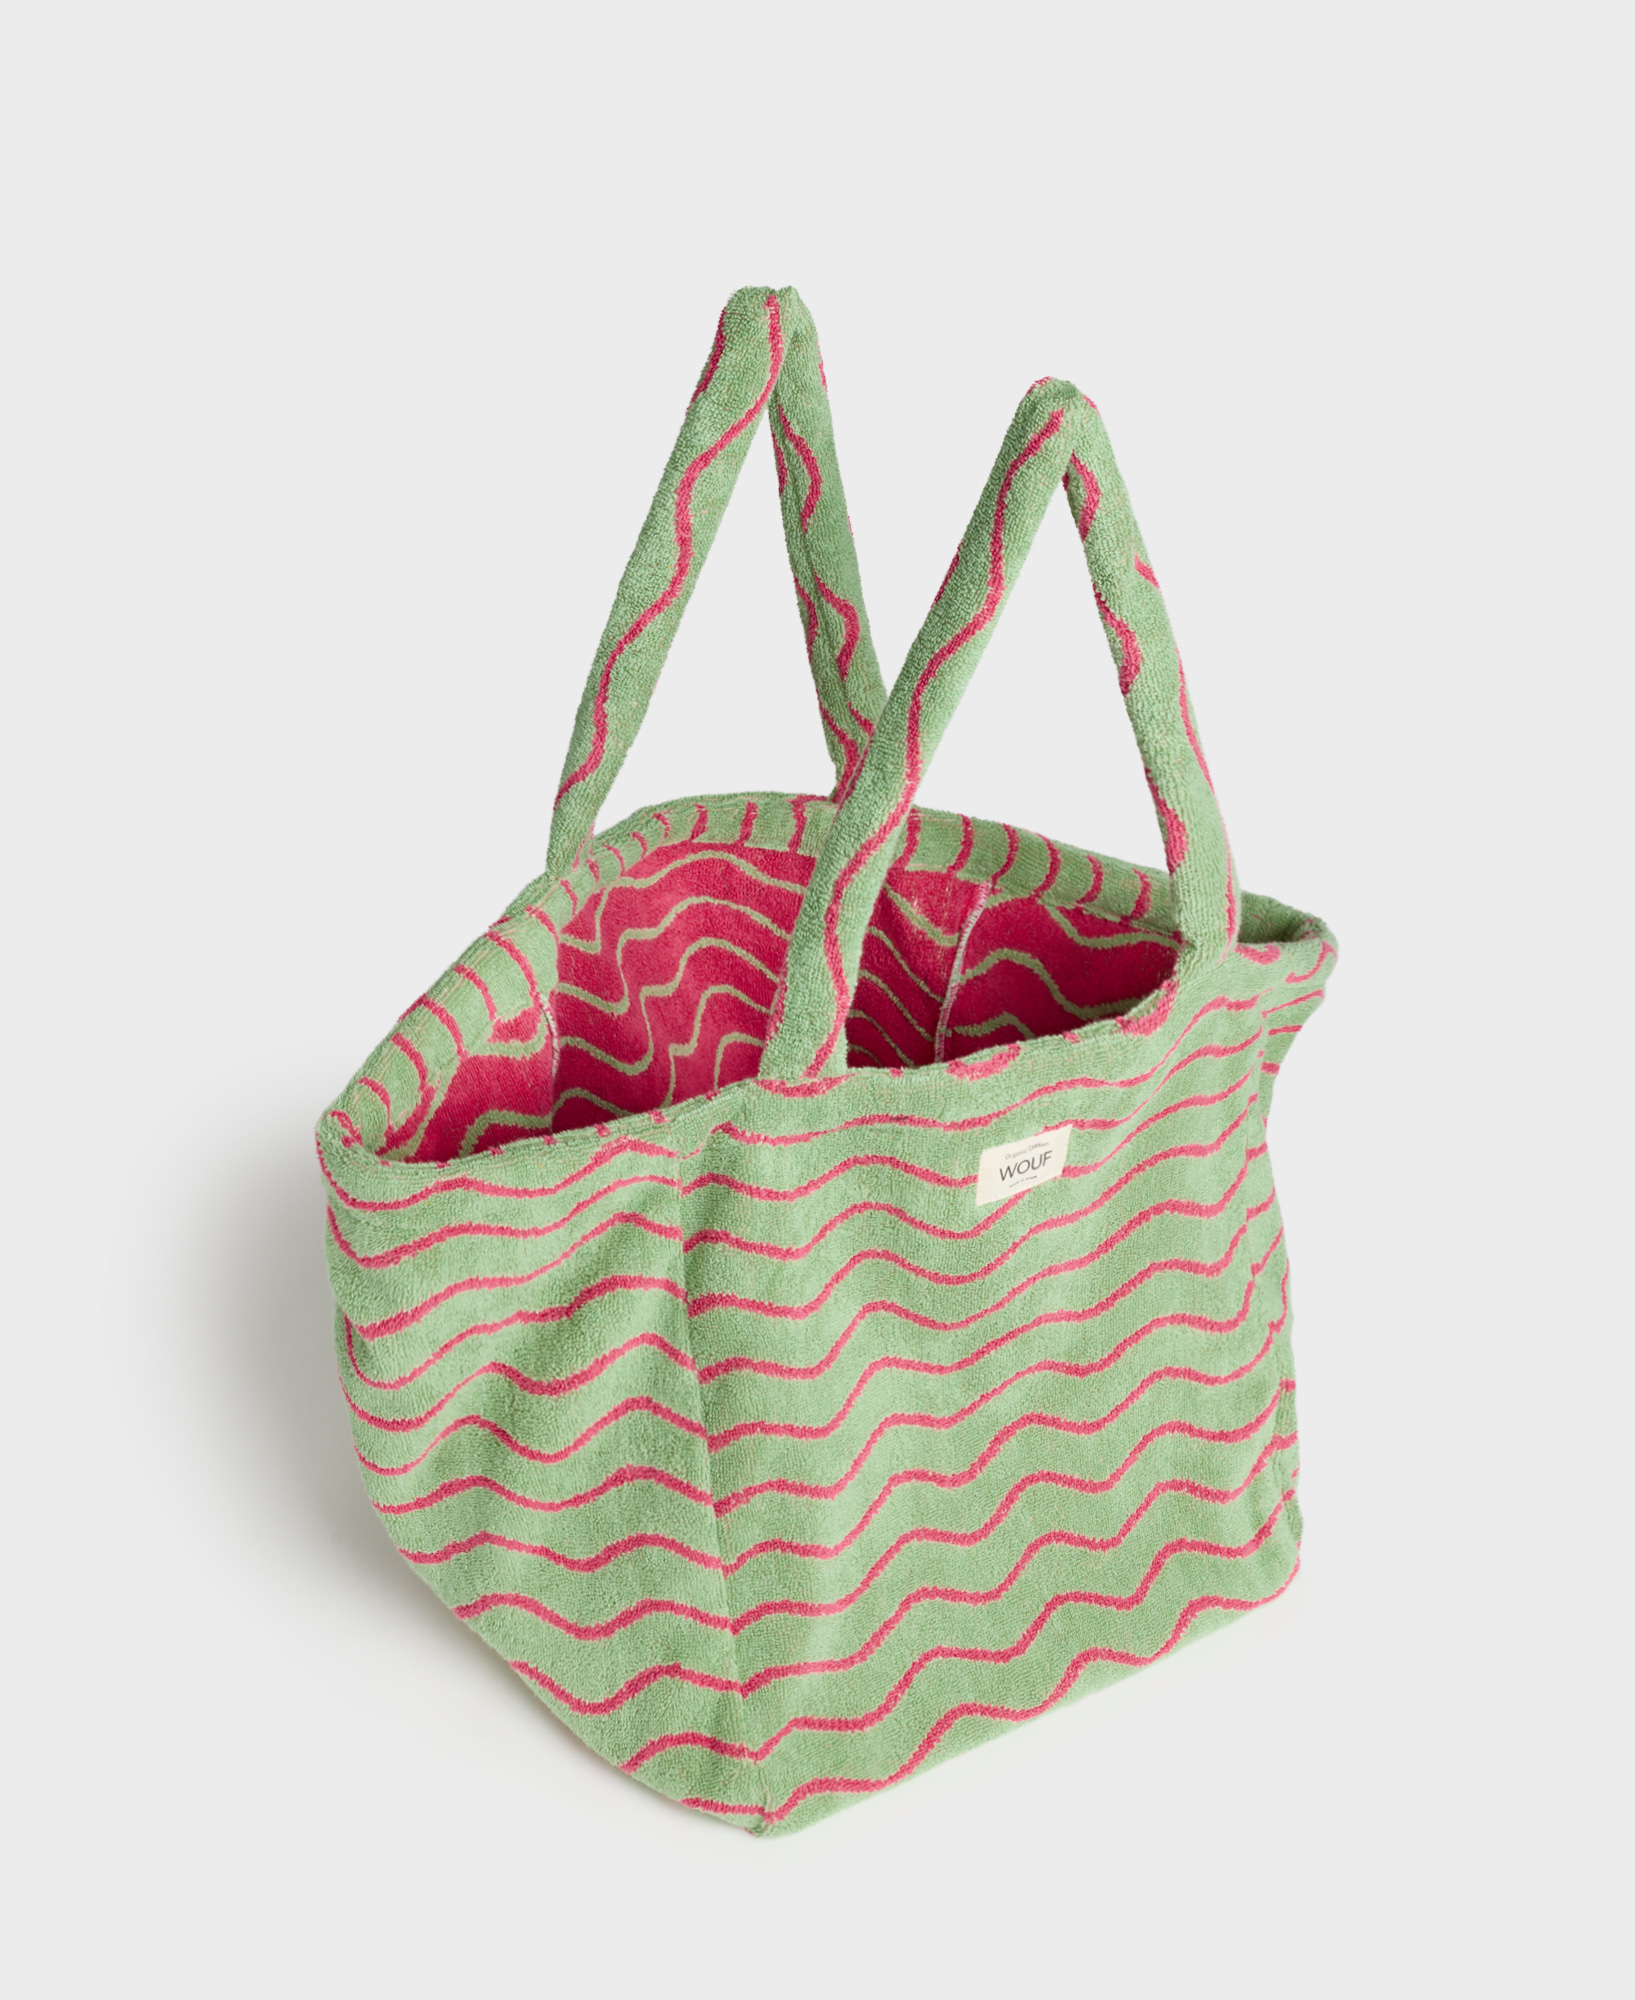 WOUF-XLTO230017-Large-Tote-Bag-Wavy-Inside